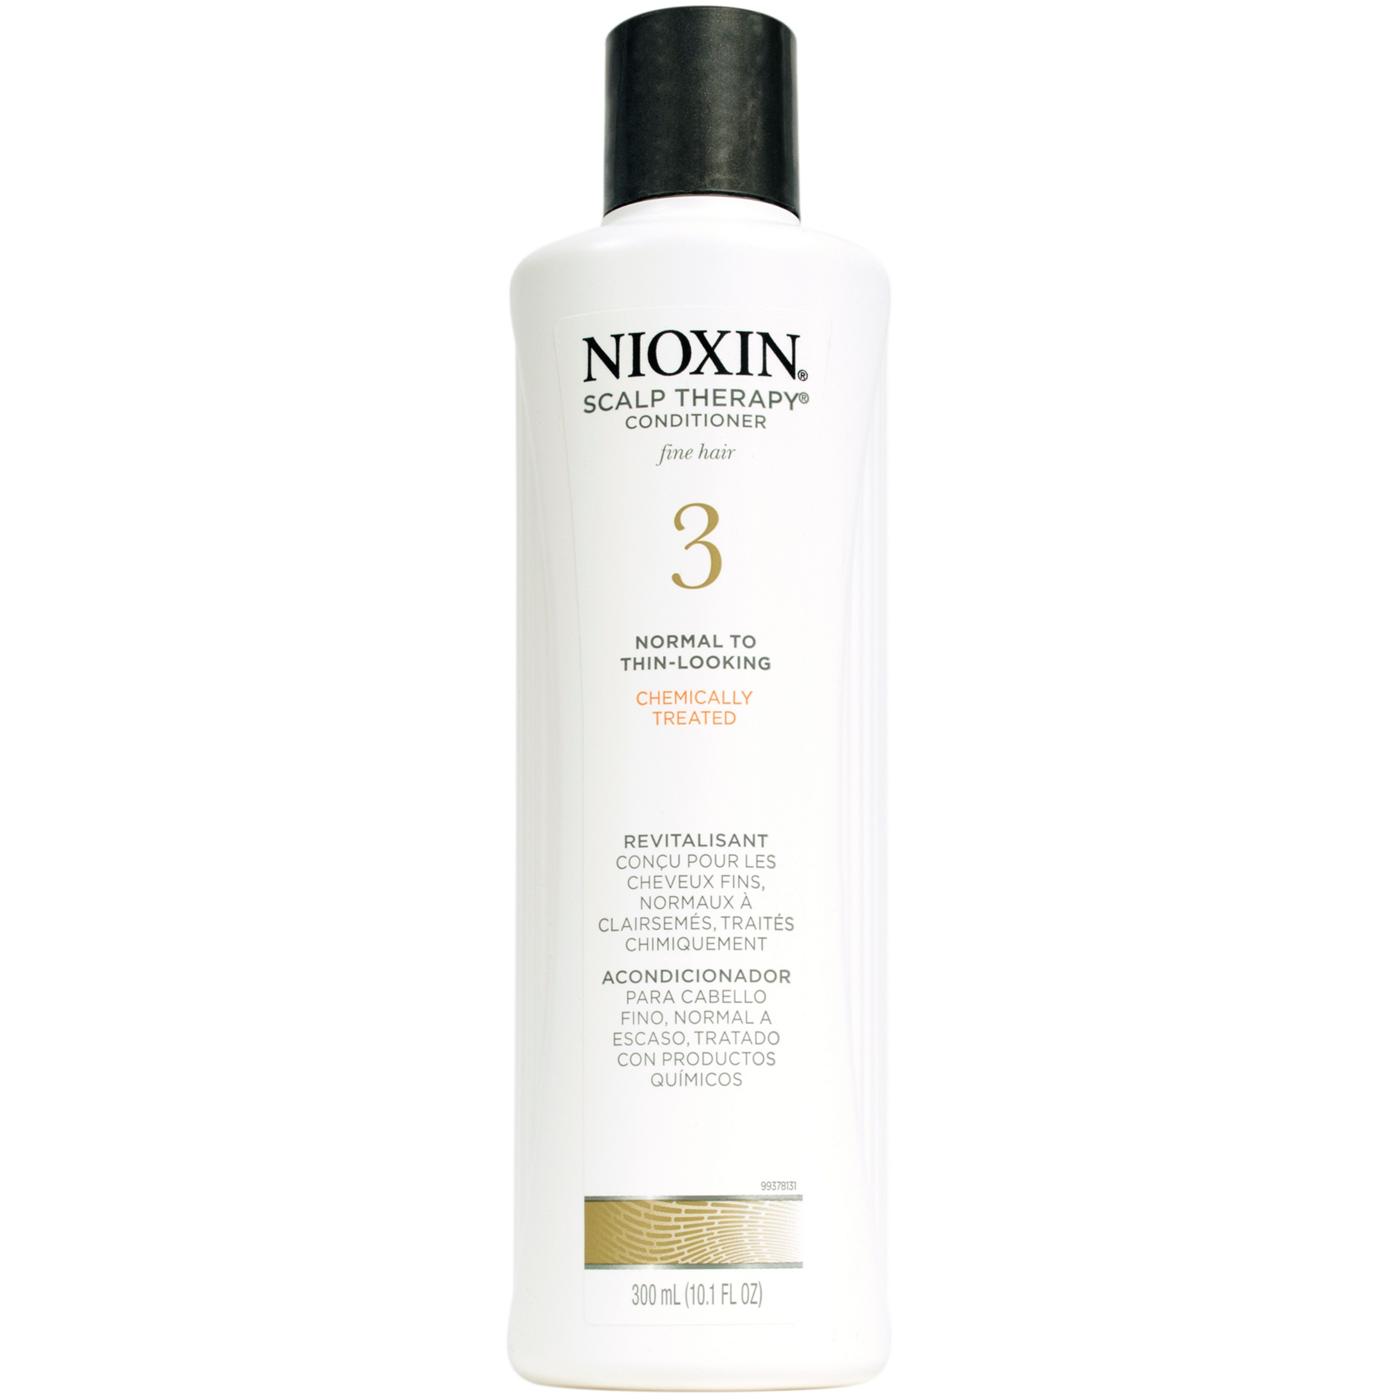 Nioxin System 3 Scalp Therapy Conditioner; image 2 of 2